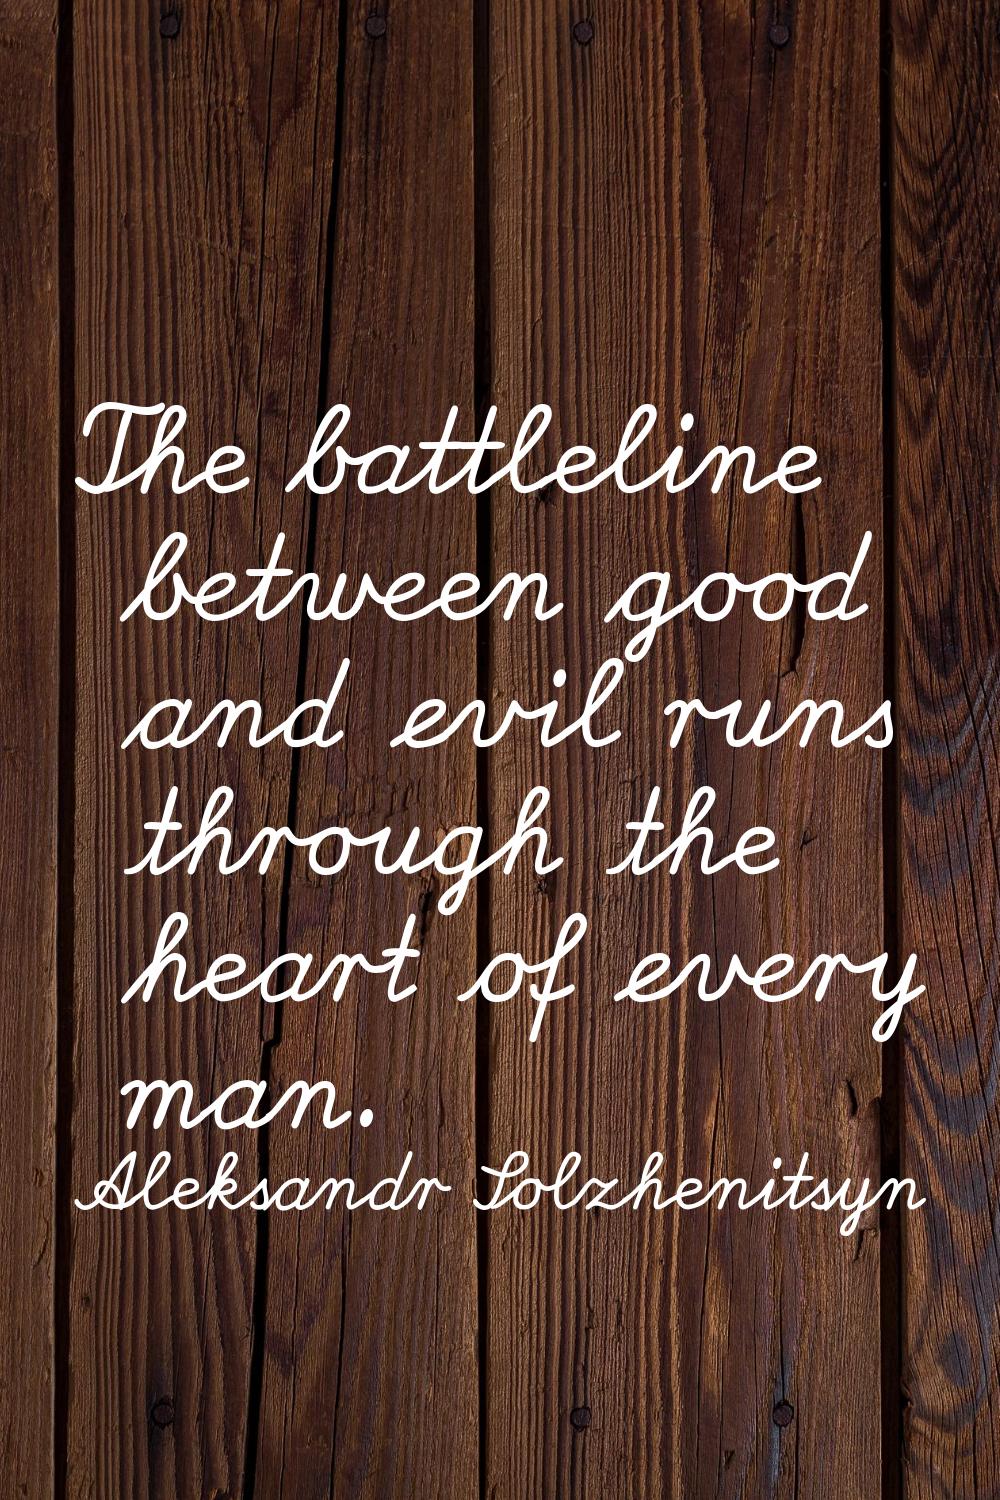 The battleline between good and evil runs through the heart of every man.